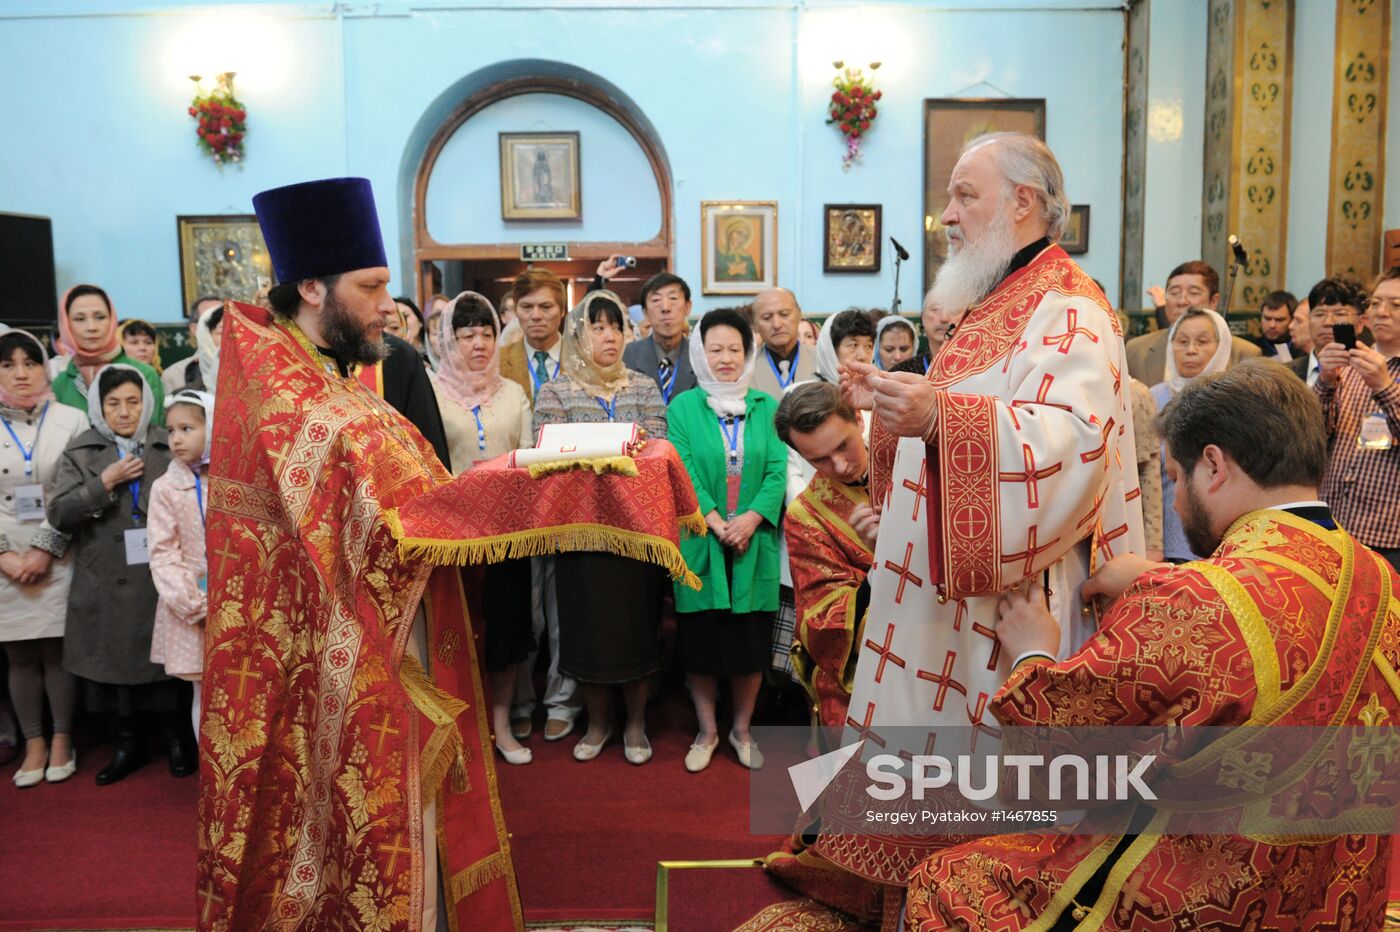 Patriarch Kirill arrives in Harbin on his visit to China